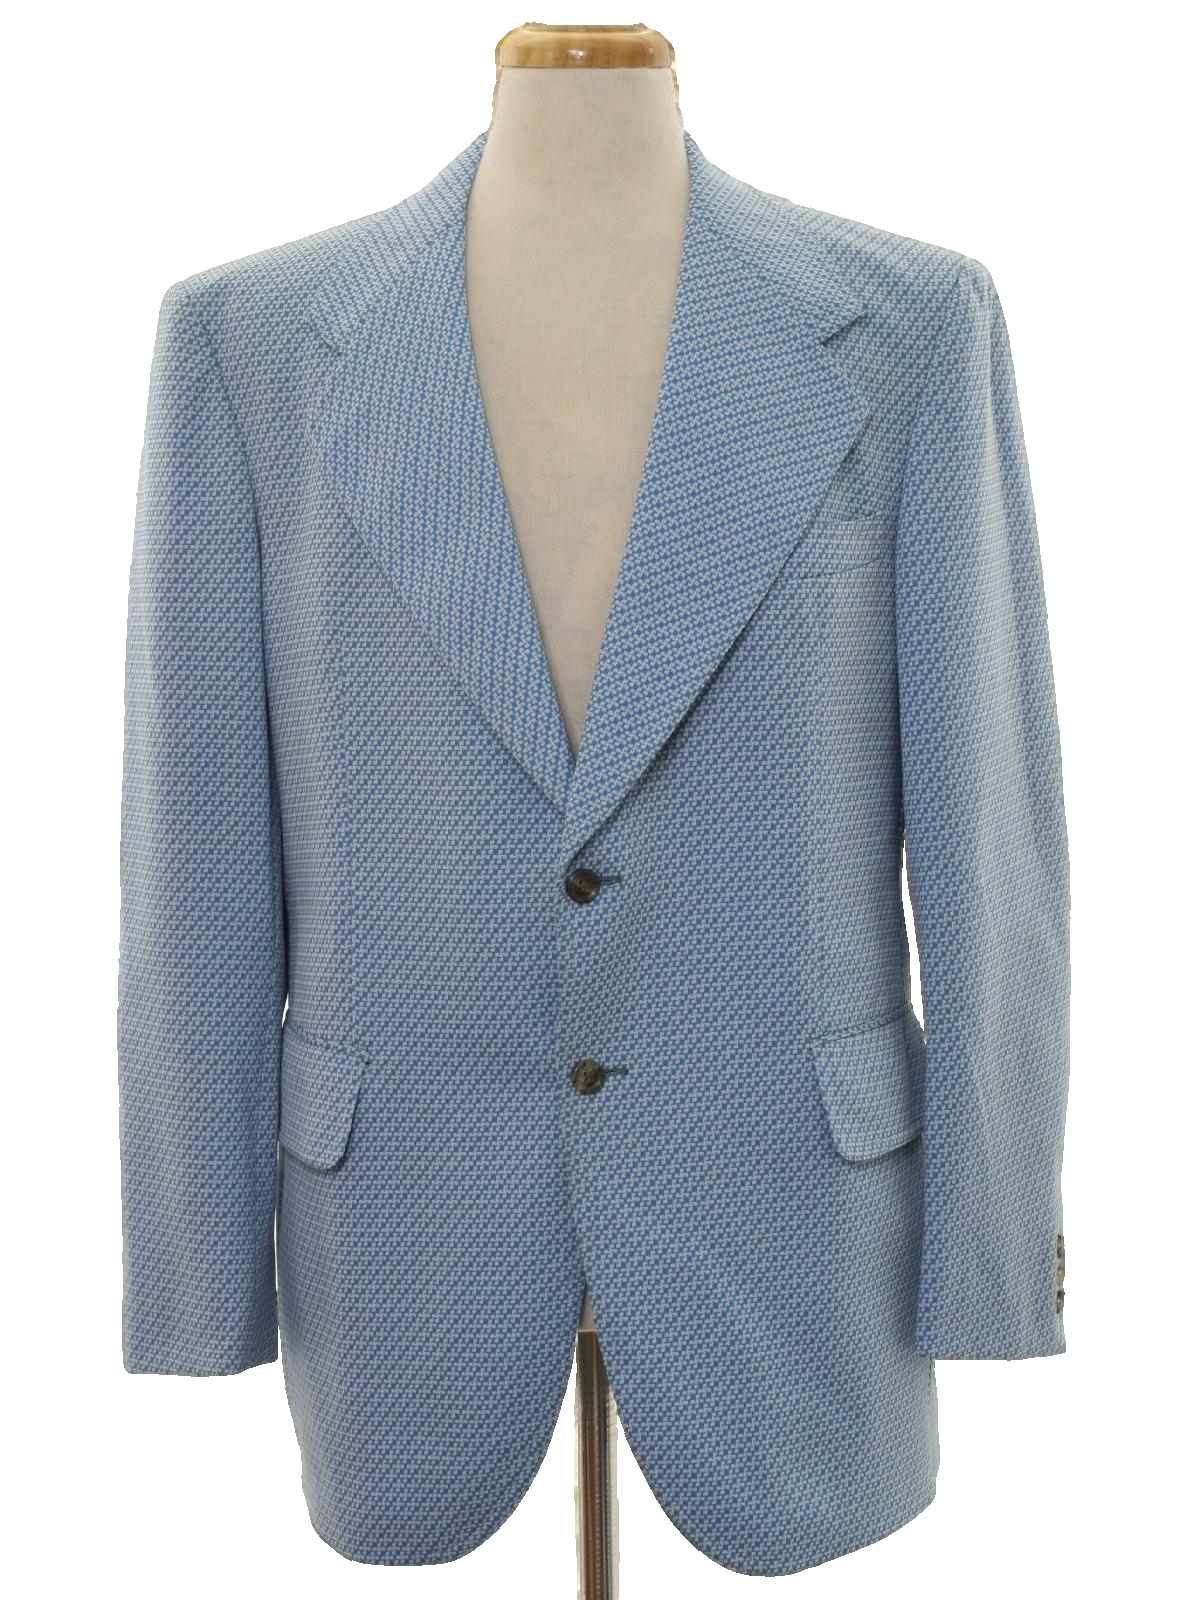 Retro Seventies Jacket: 70s -Care Label- Mens light blue and white ...